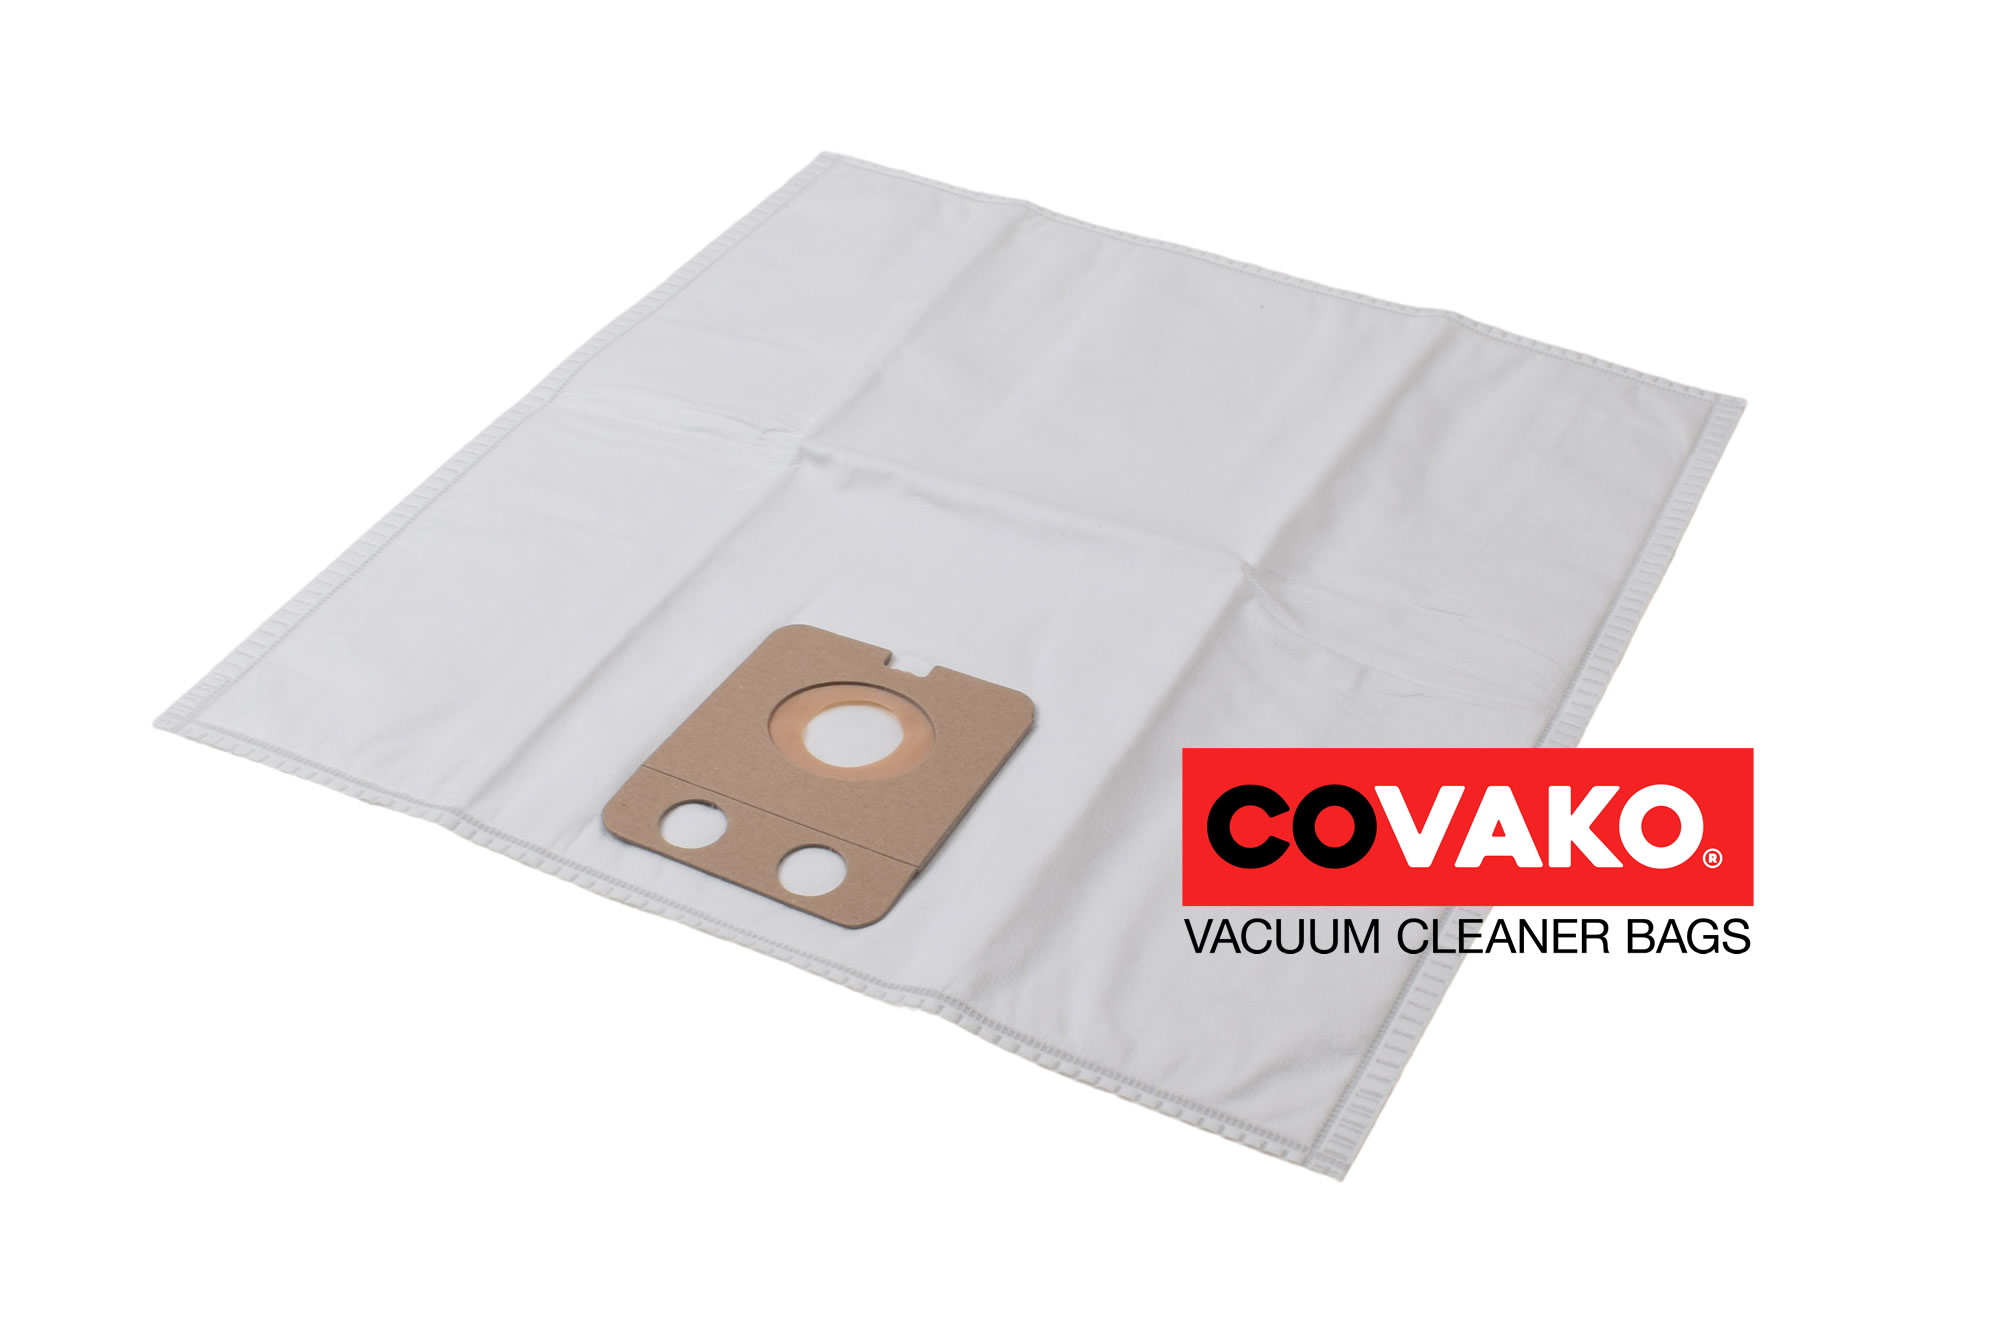 Alto GD 111 eco / Synthesis - Alto vacuum cleaner bags